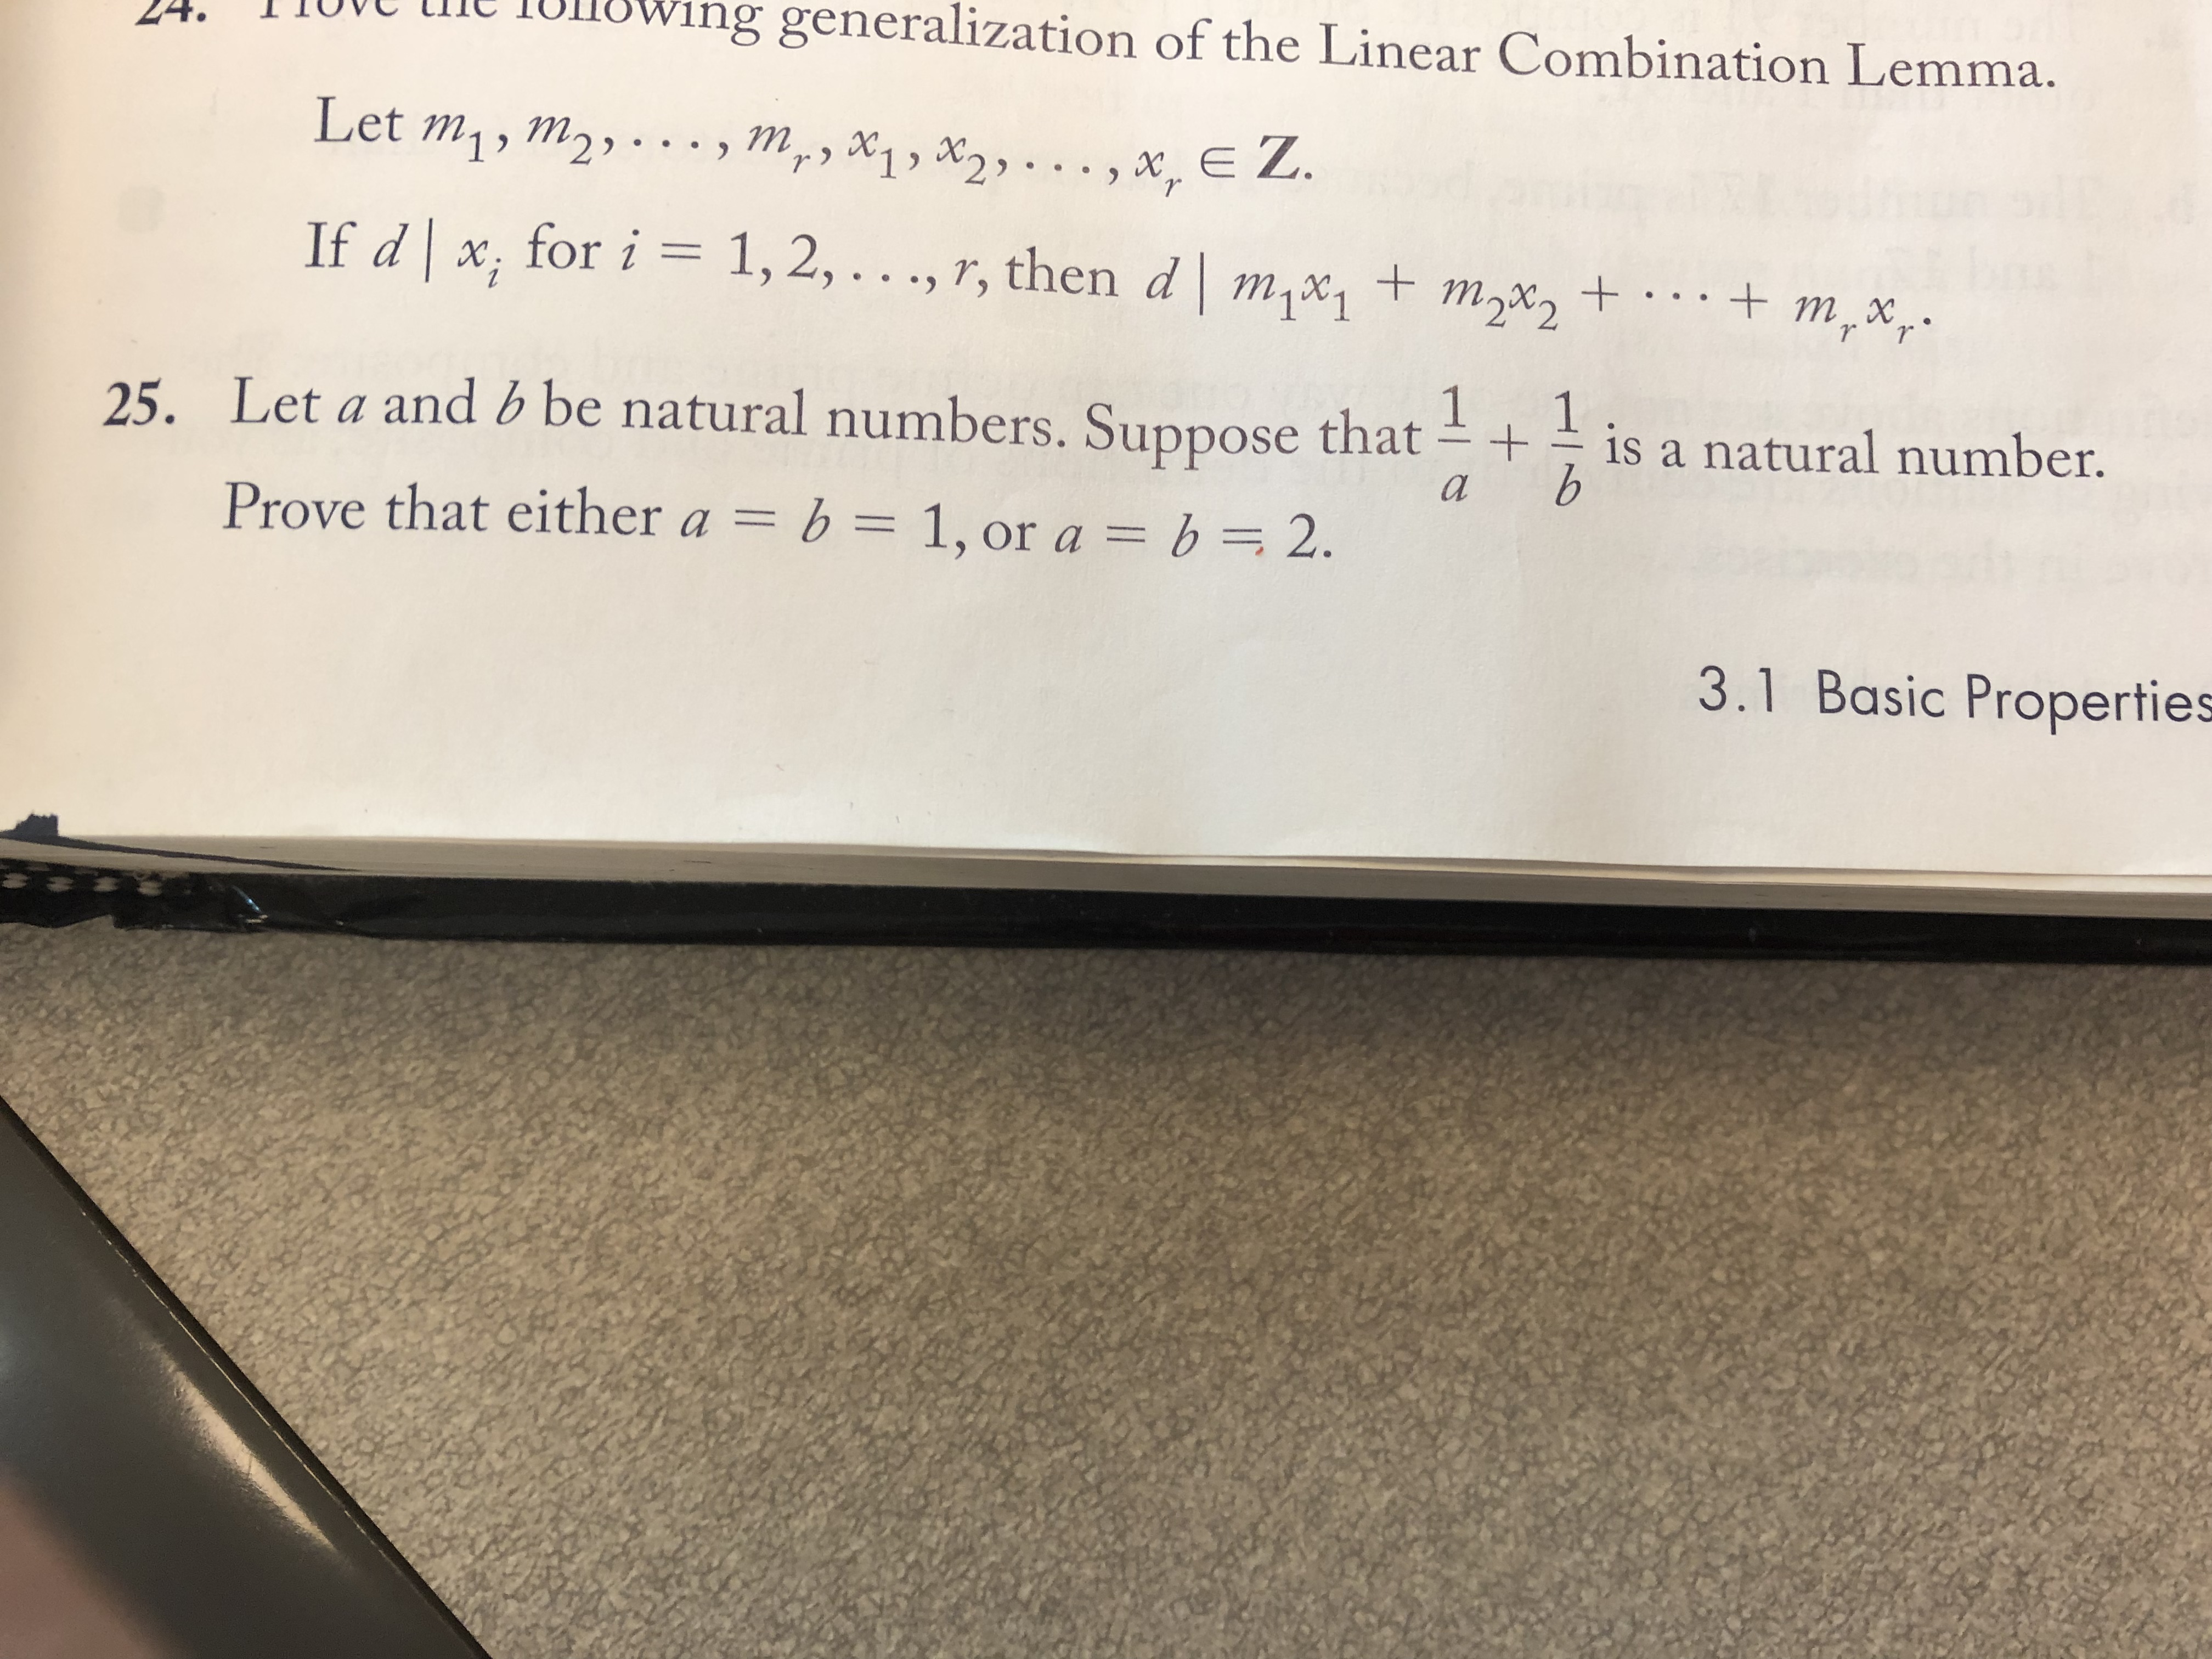 24. TIO
ieing generalization of the Linear Combination Lemma.
Let mi, m2
If d x, for i 1,2,. . ., 7, then d m%2mx
my x1 , 2) .. x, EZ
is a natural number.
25. Let a and b be natural numbers. Suppose that
Prove that either ab 1,or a b 2.
3.1 Basic Properties
